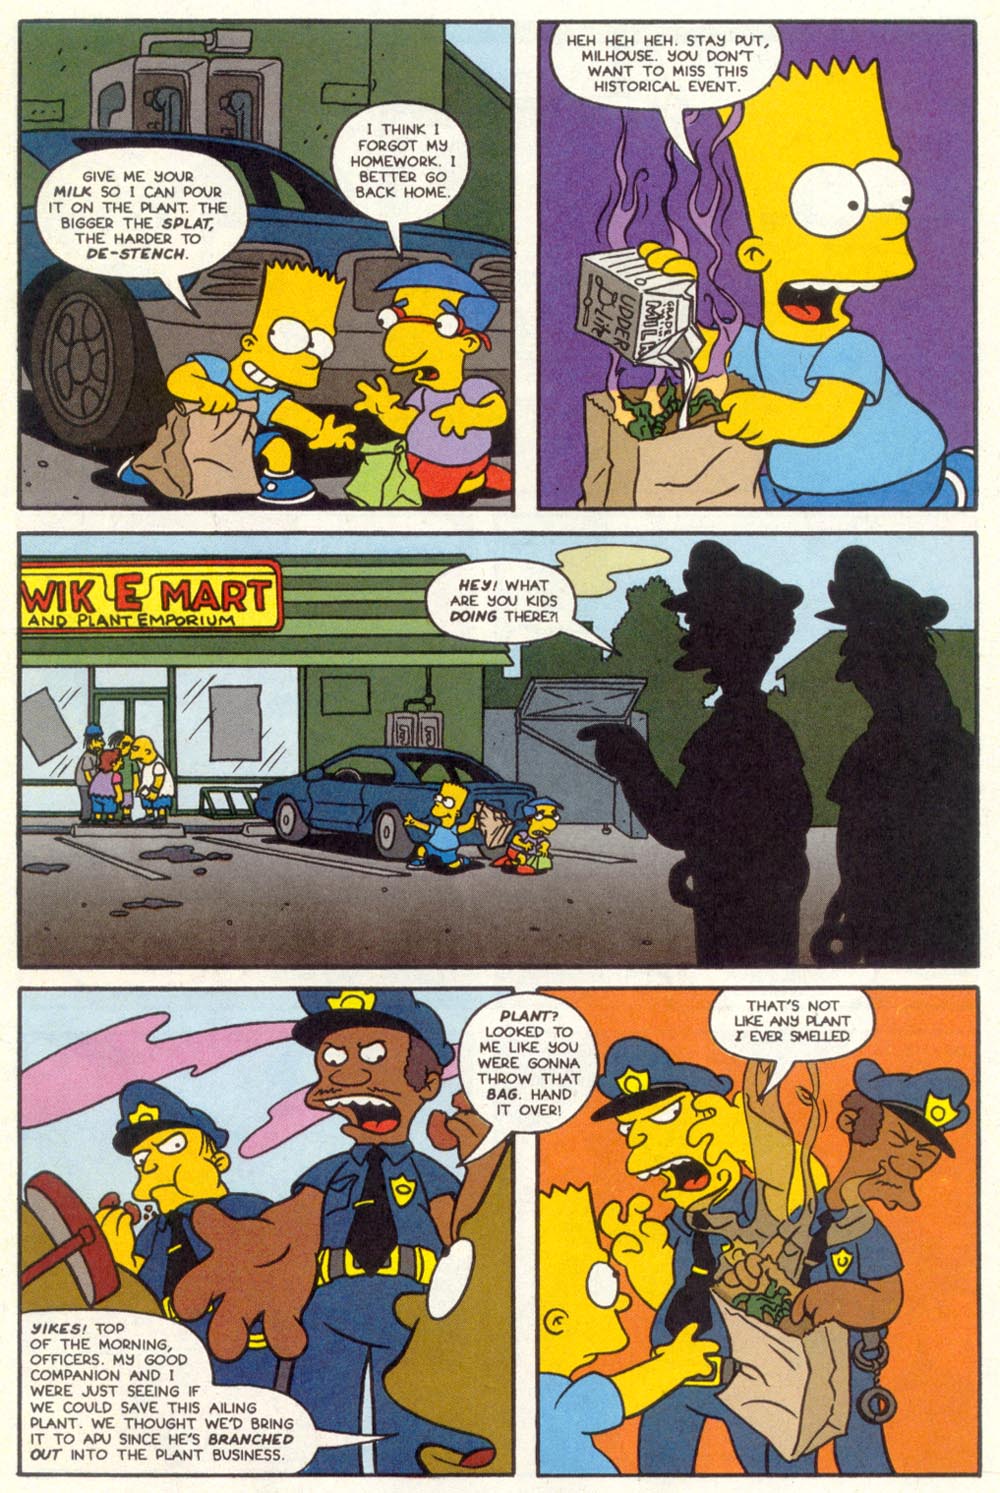 Read online Treehouse of Horror comic -  Issue #1 - 9